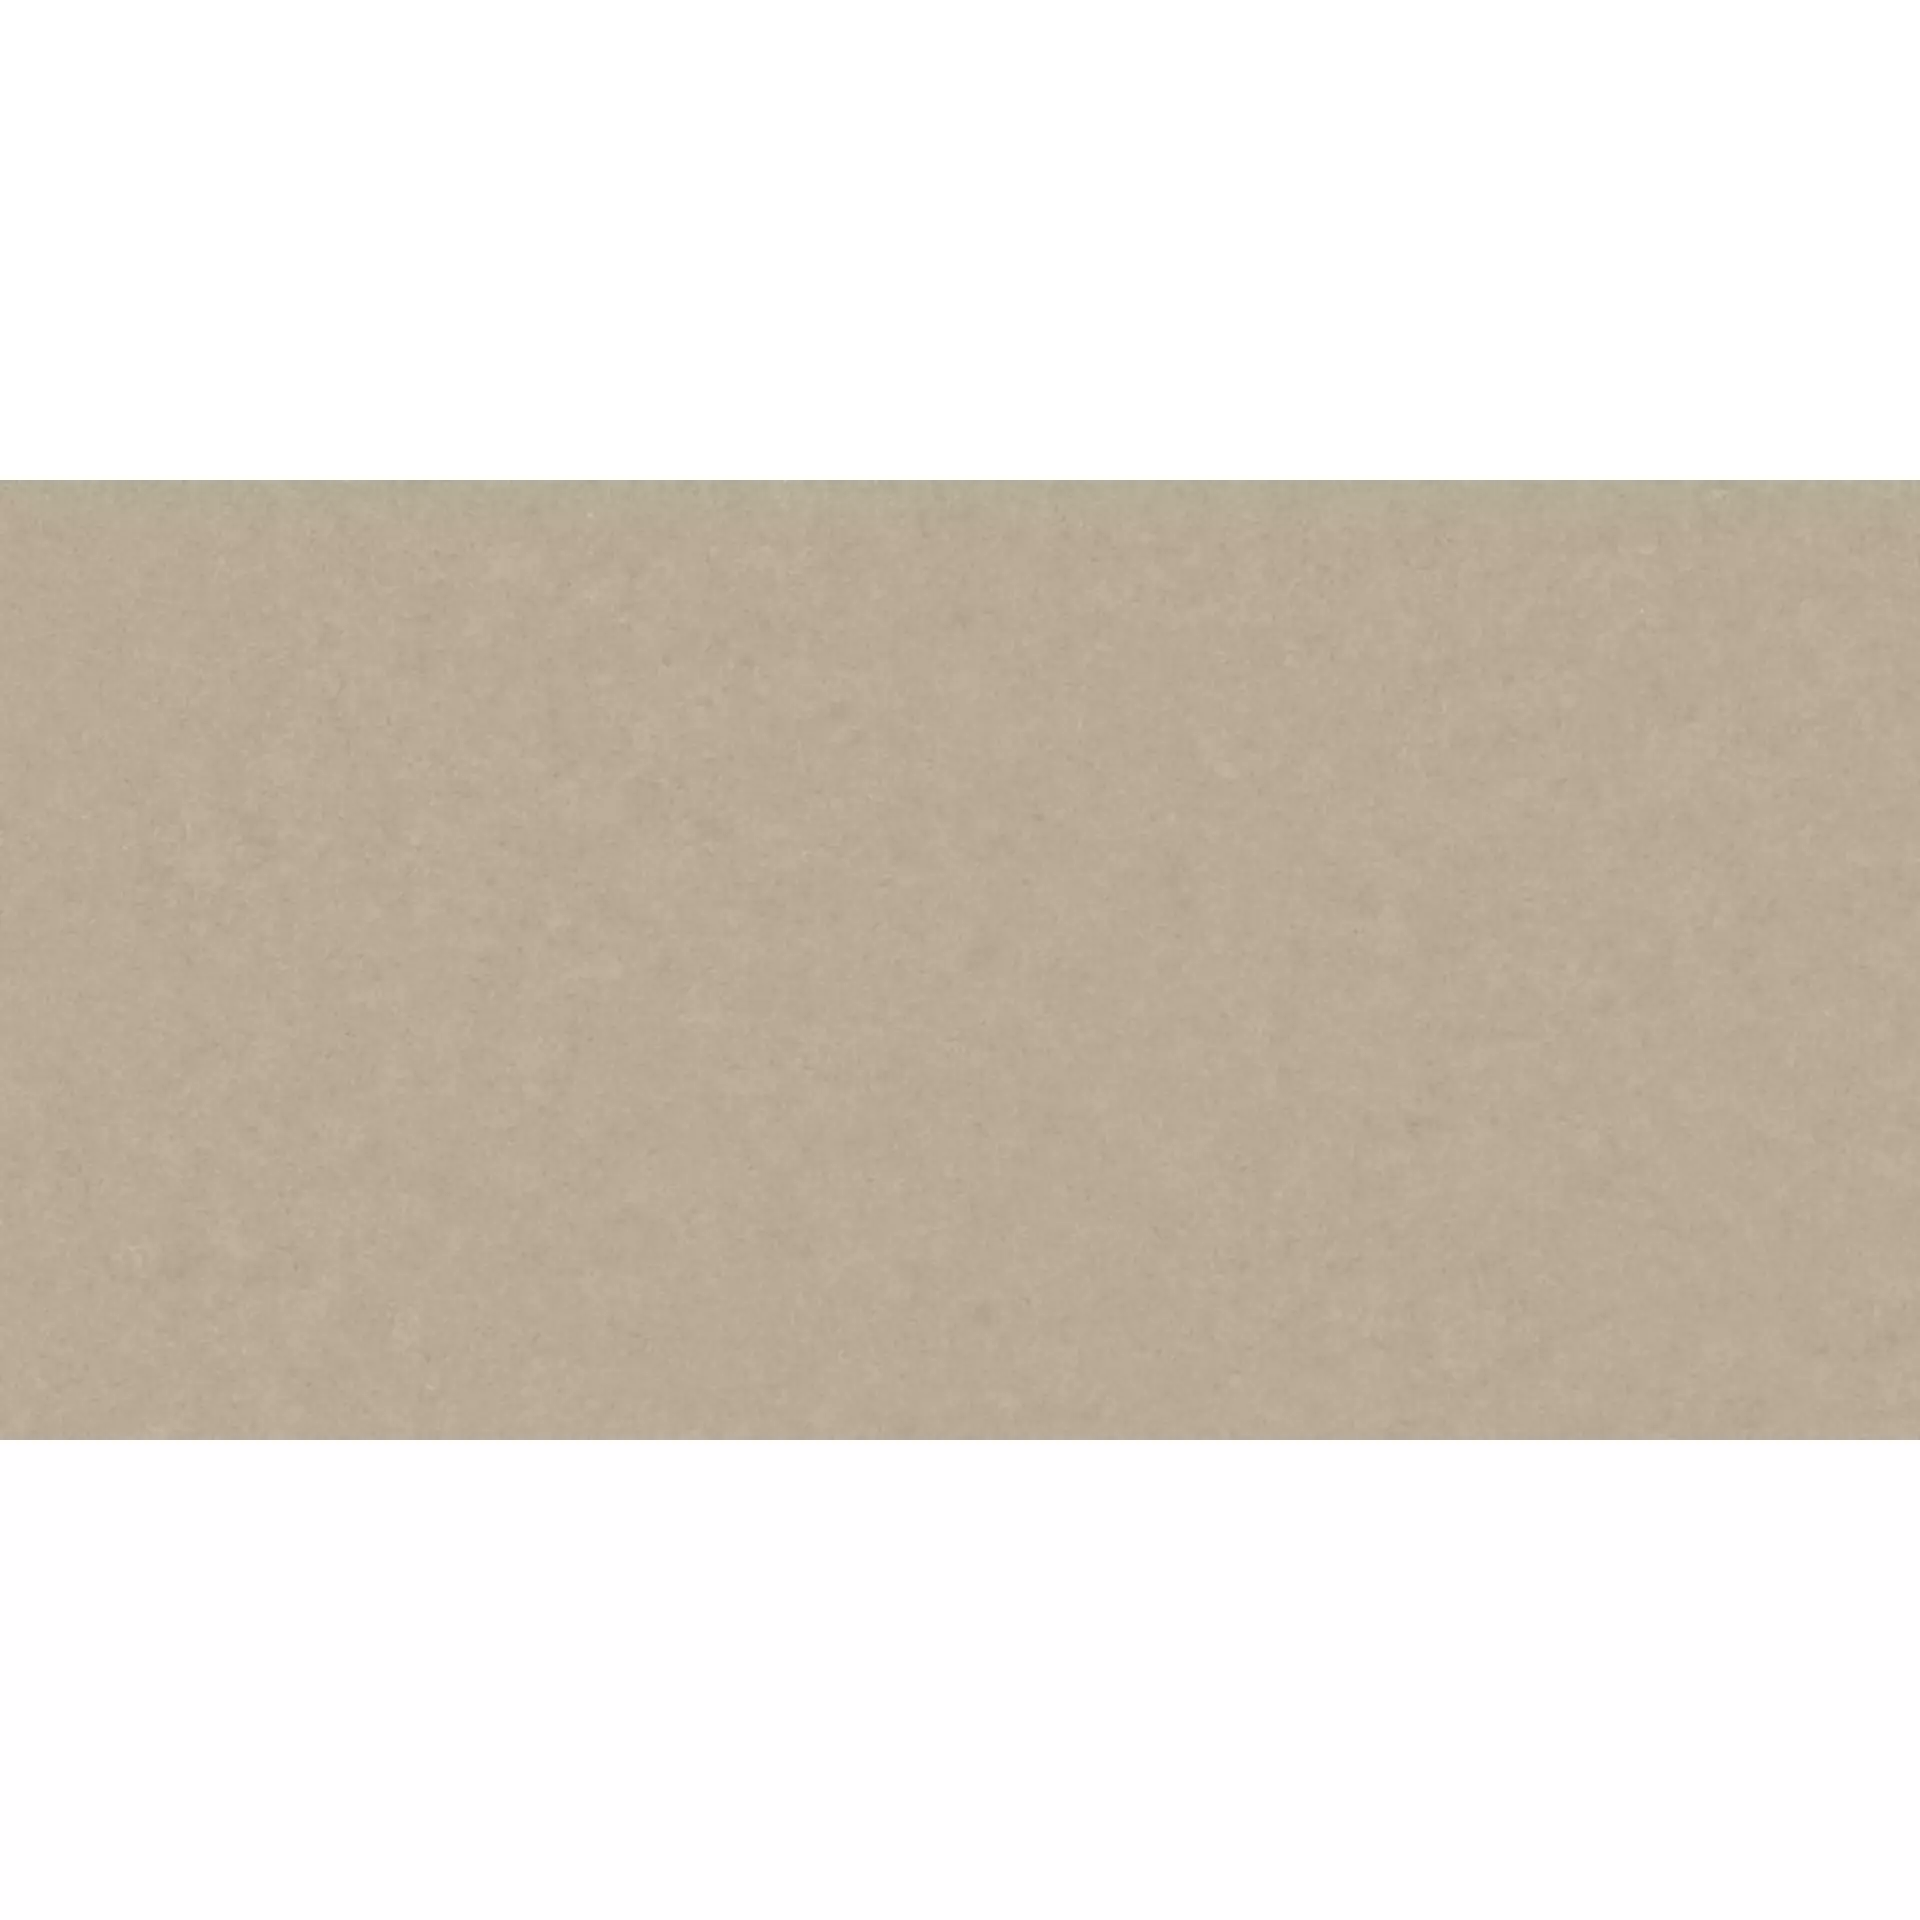 Blustyle Blutech Beige Lappato BC-BT25 30x60cm rectified 10mm